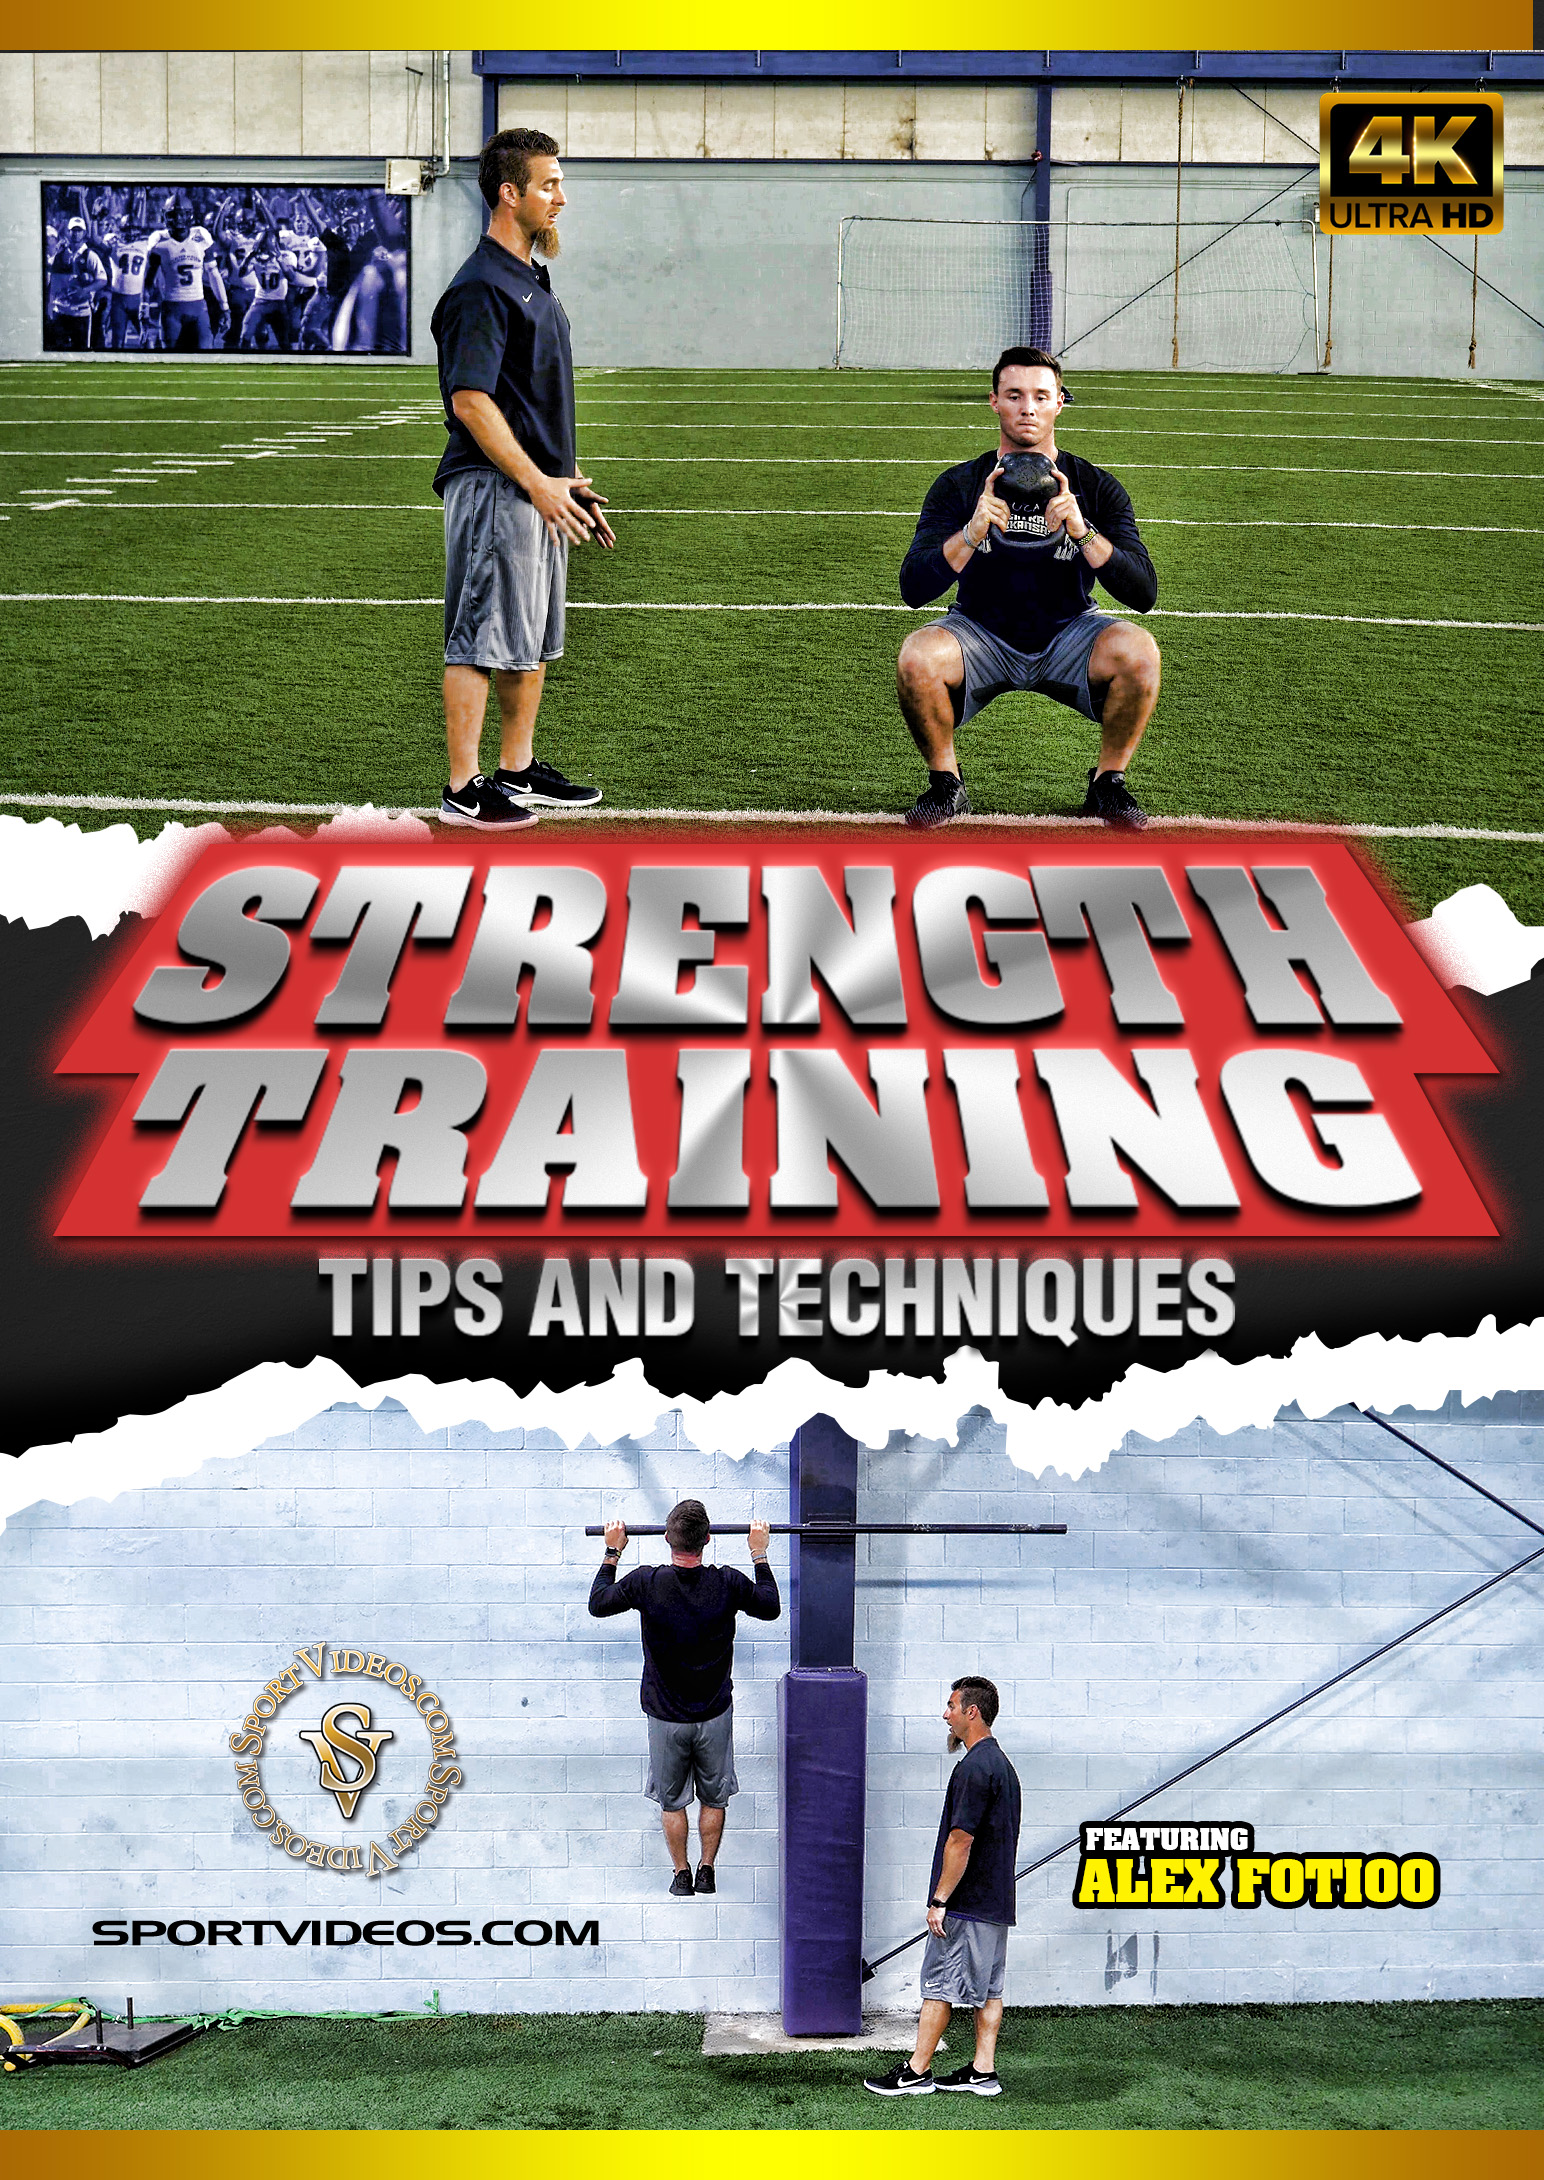 Strength Training Tips and Techniques (4K Video) Download (2018 Title)